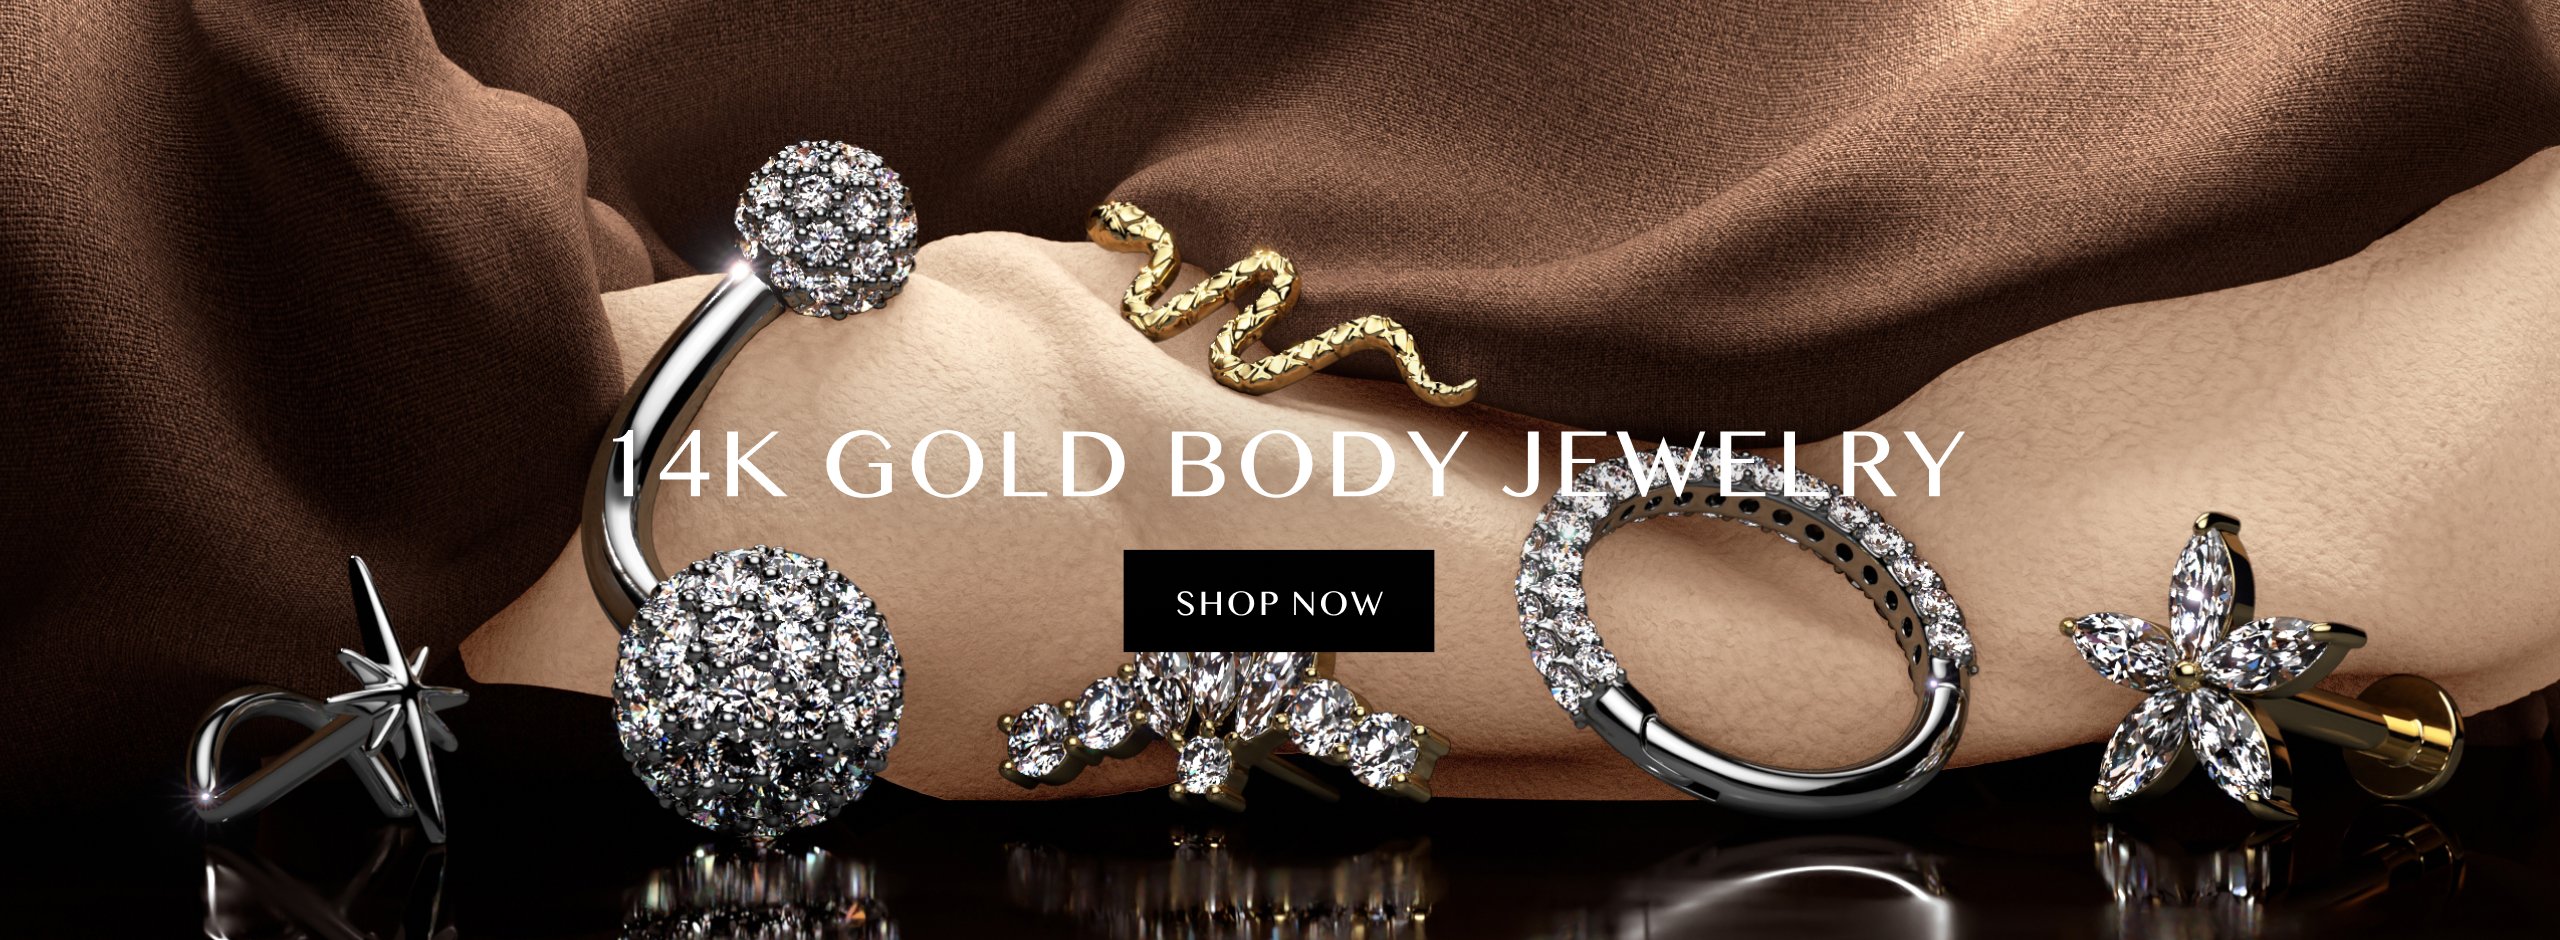 Luxurious body jewelry in solid 14K yellow or white gold.